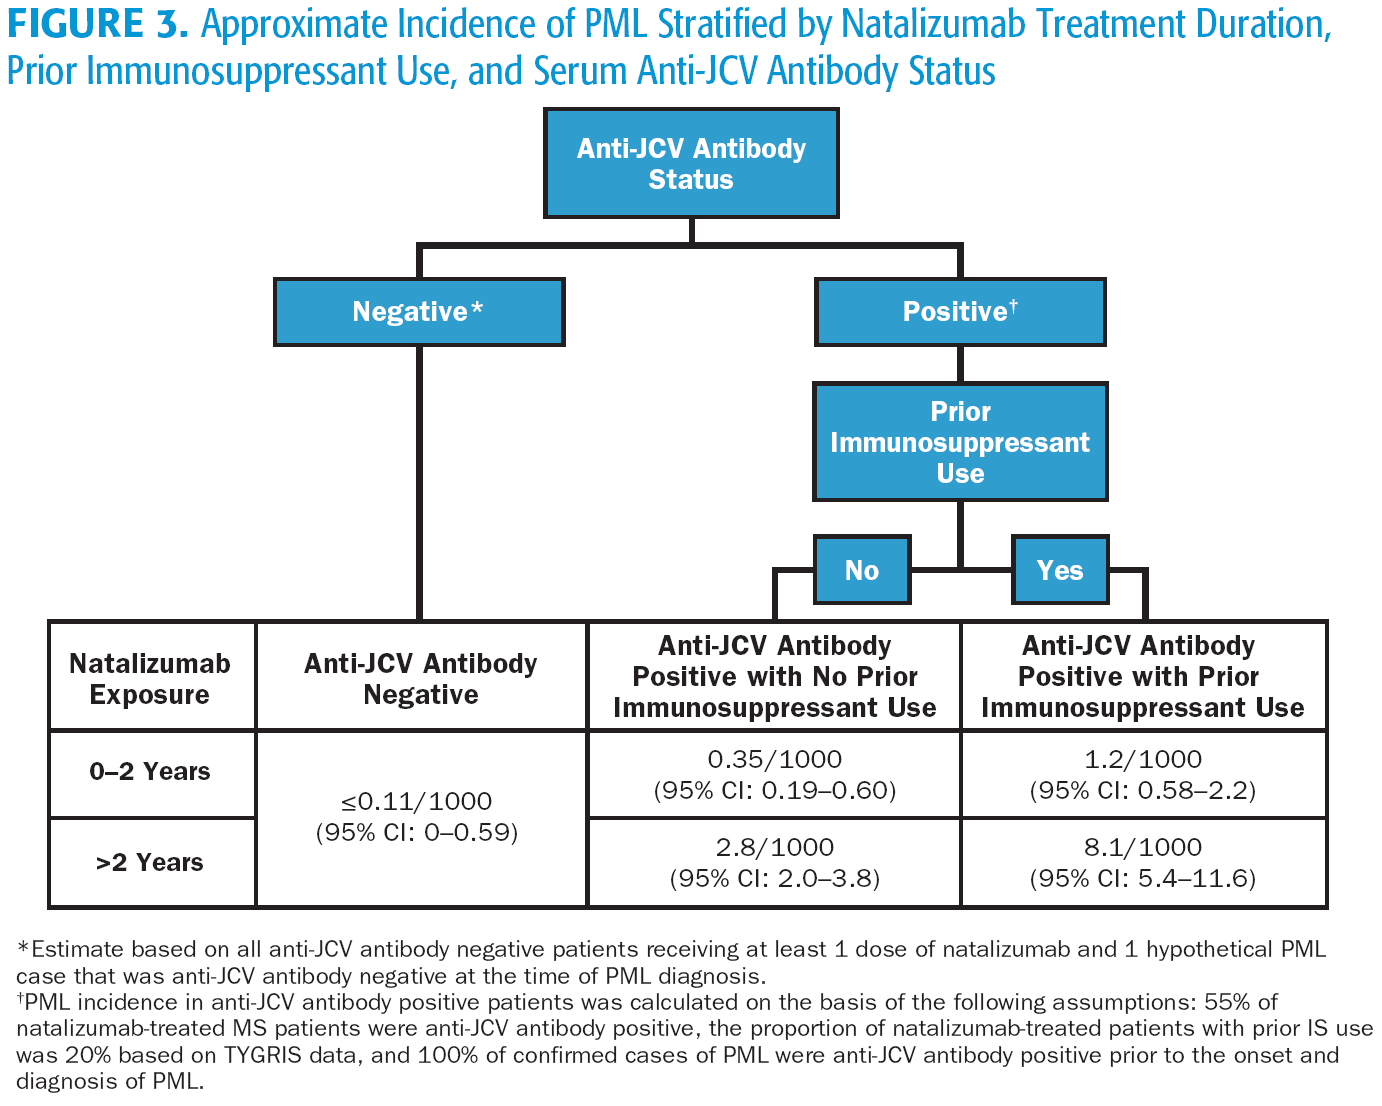 Hypothetical Risk Stratification: Prior IS Use, Treatment